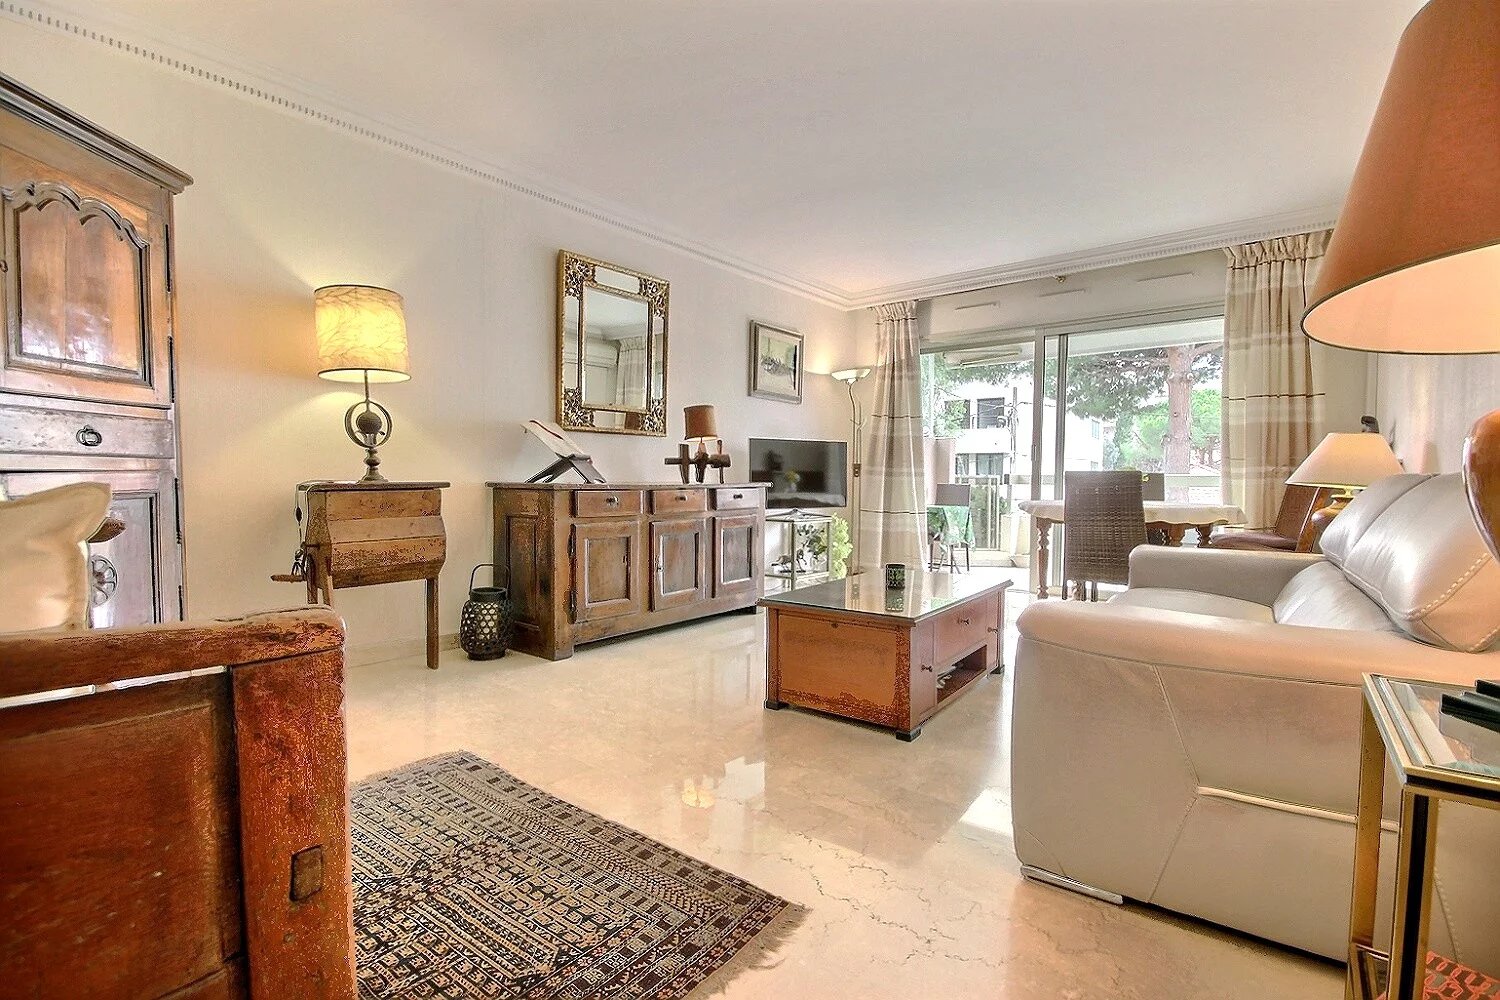 Cannes  Basse Californie property for sale